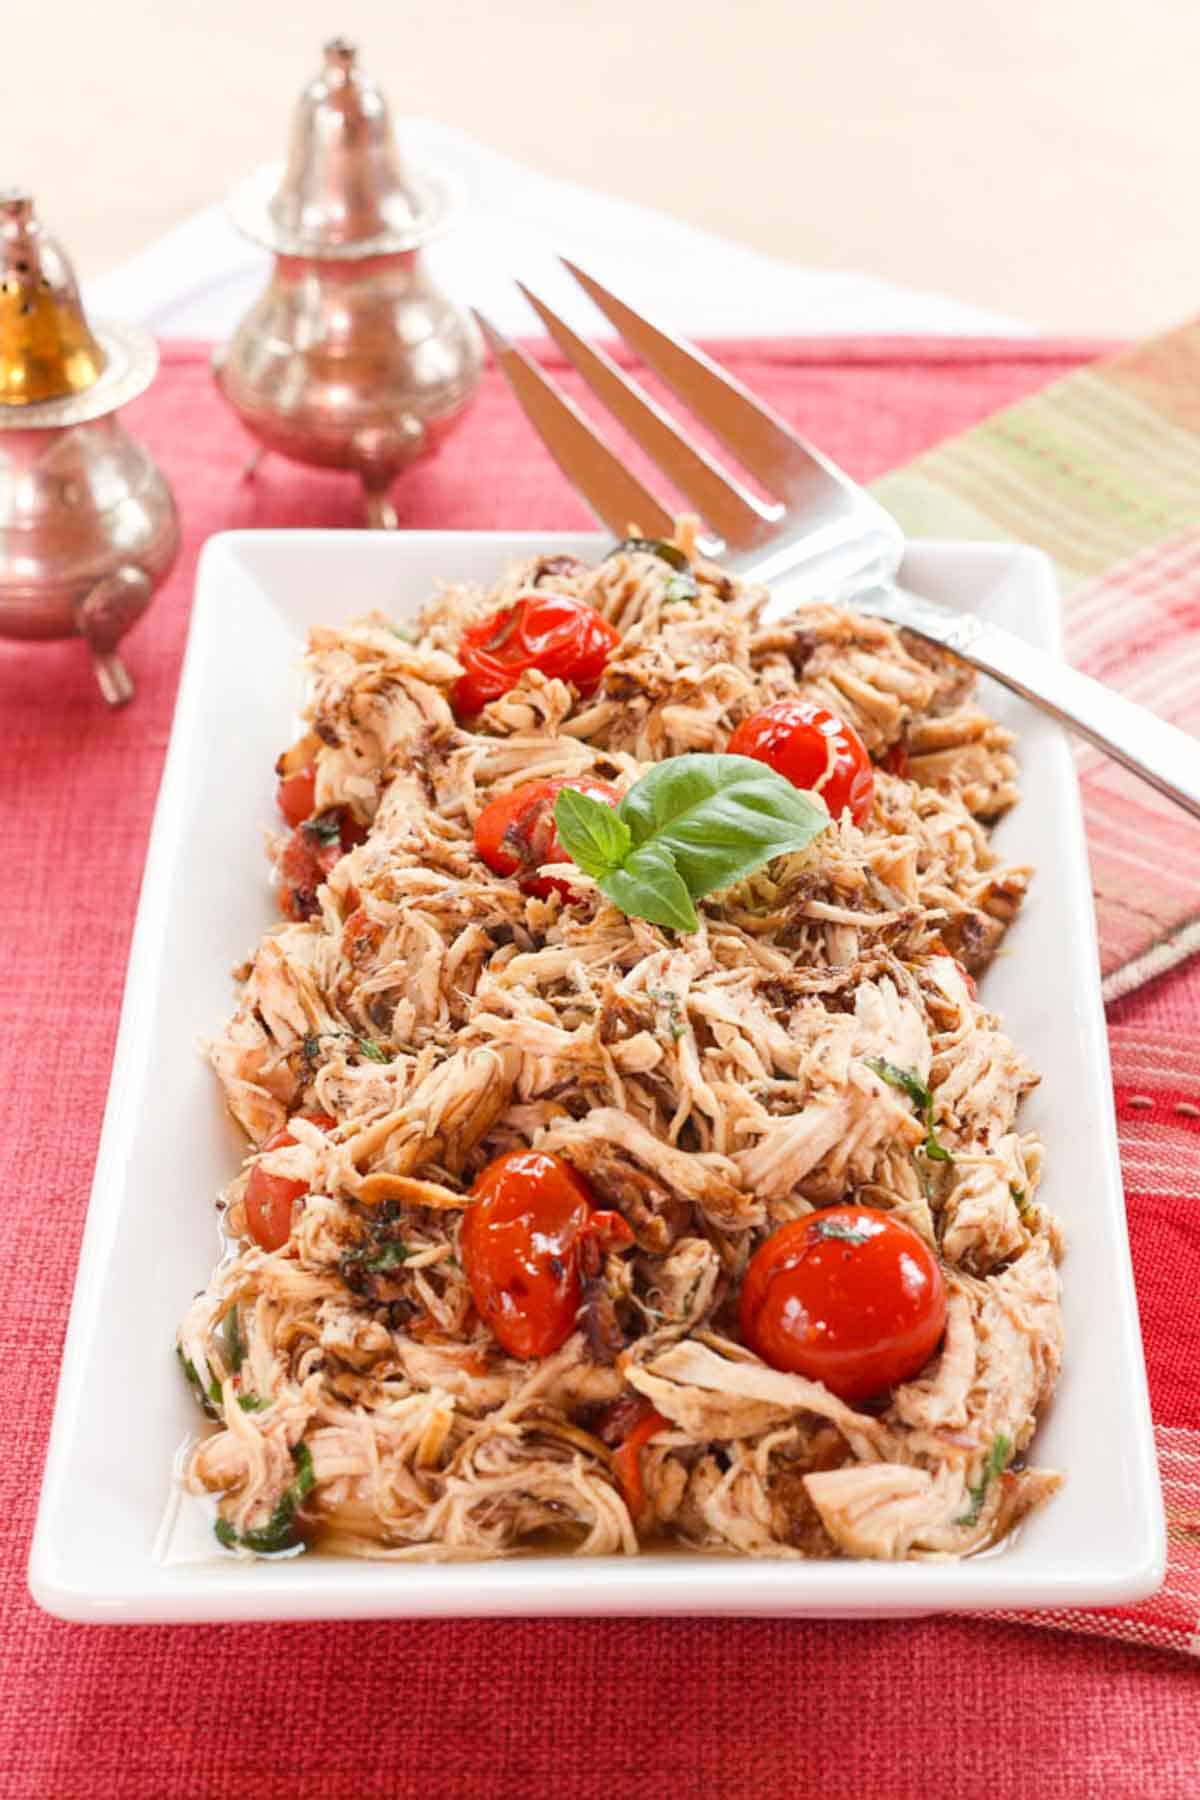 Shredded Balsamic Chicken with Tomatoes and a sprig of Basil on a white rectangular plate on top of a red placemat.